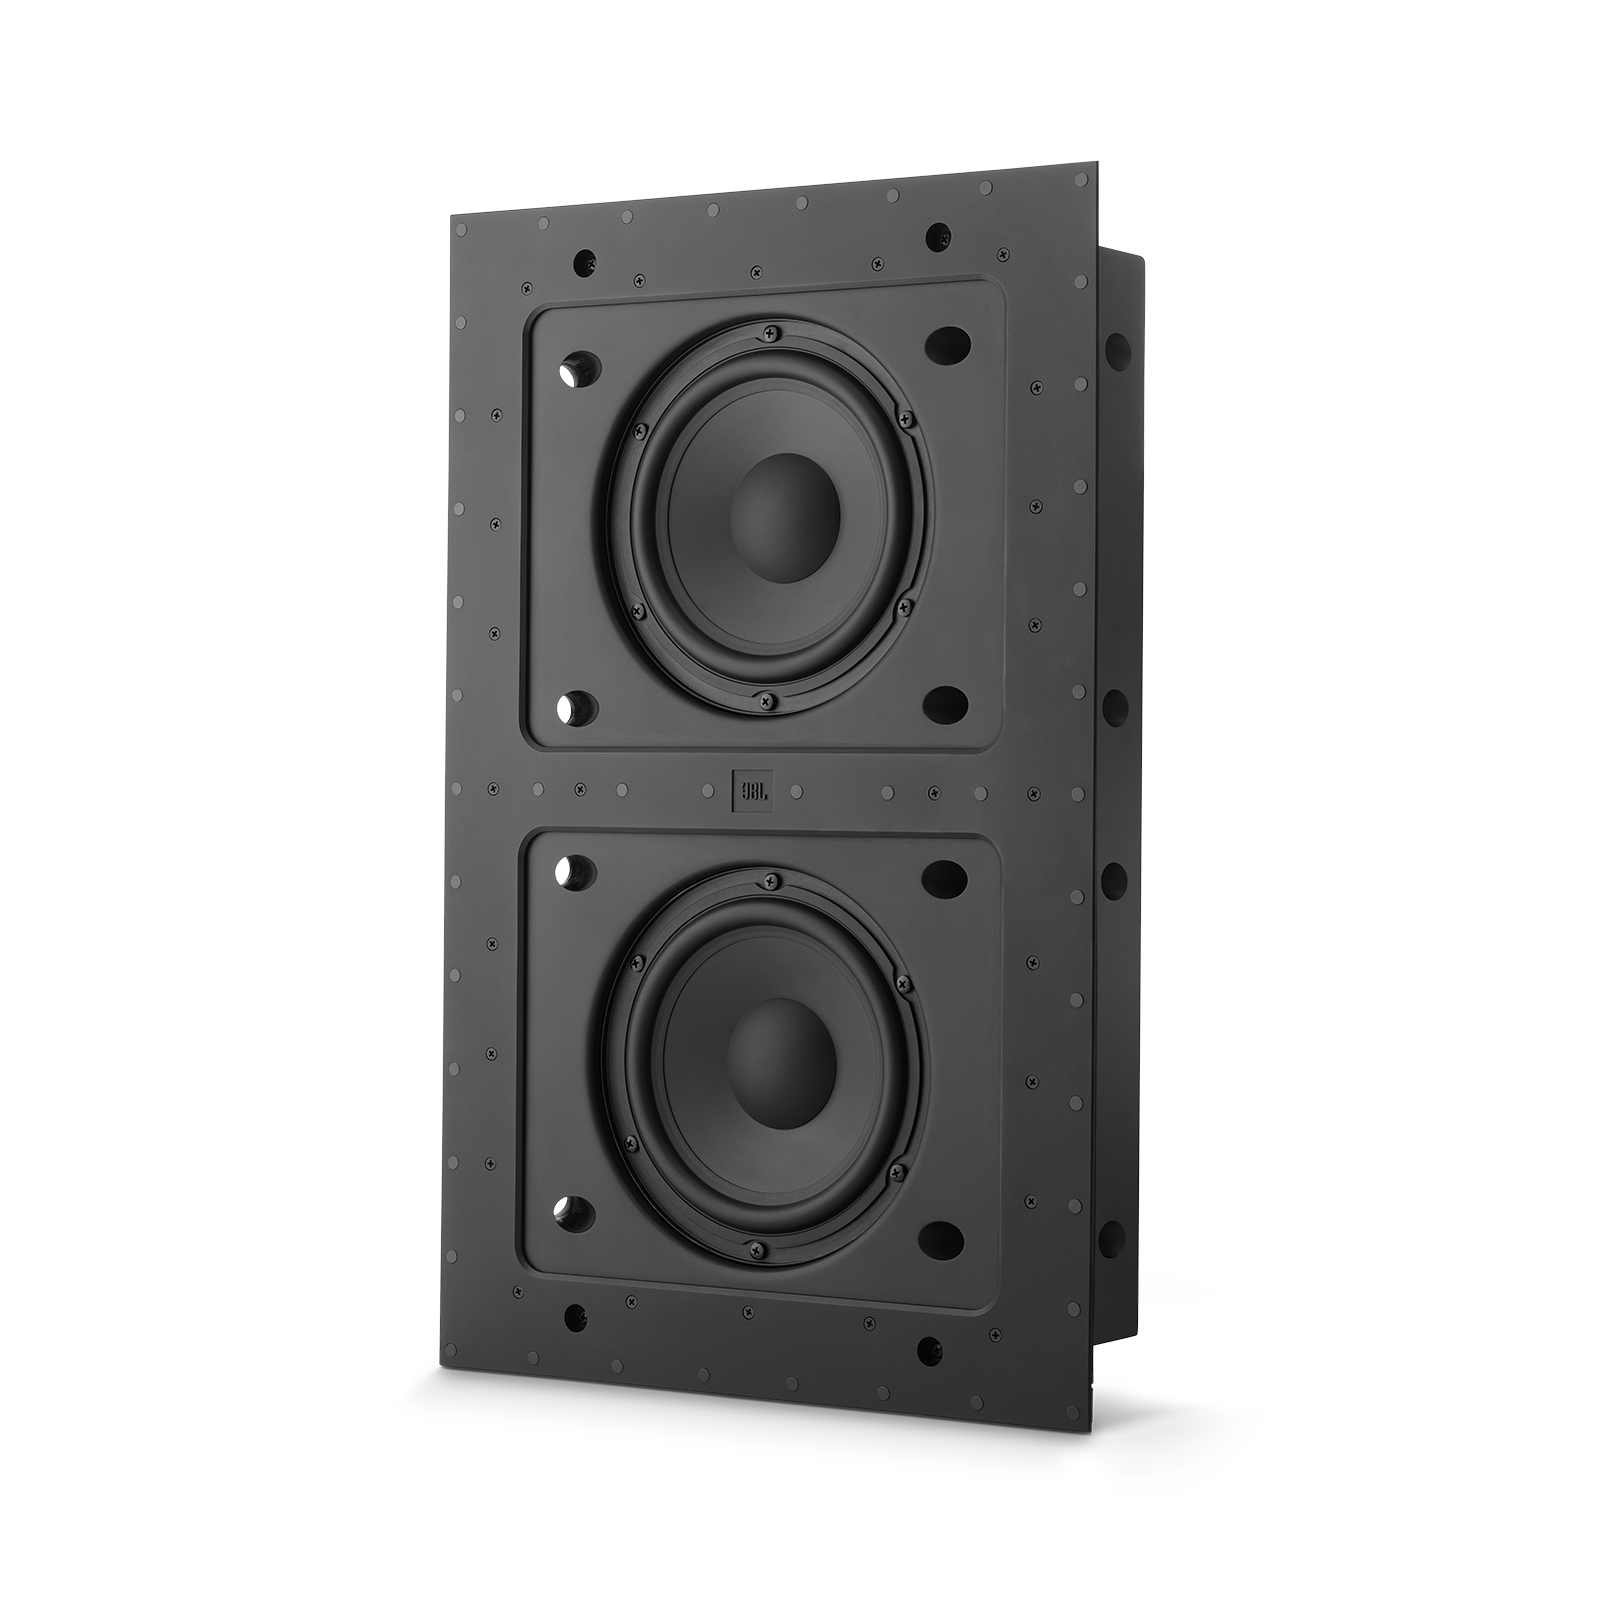 SSW-4 - Black Matte - Dual 8” (200mm) In-wall Passive Subwoofer - Hero